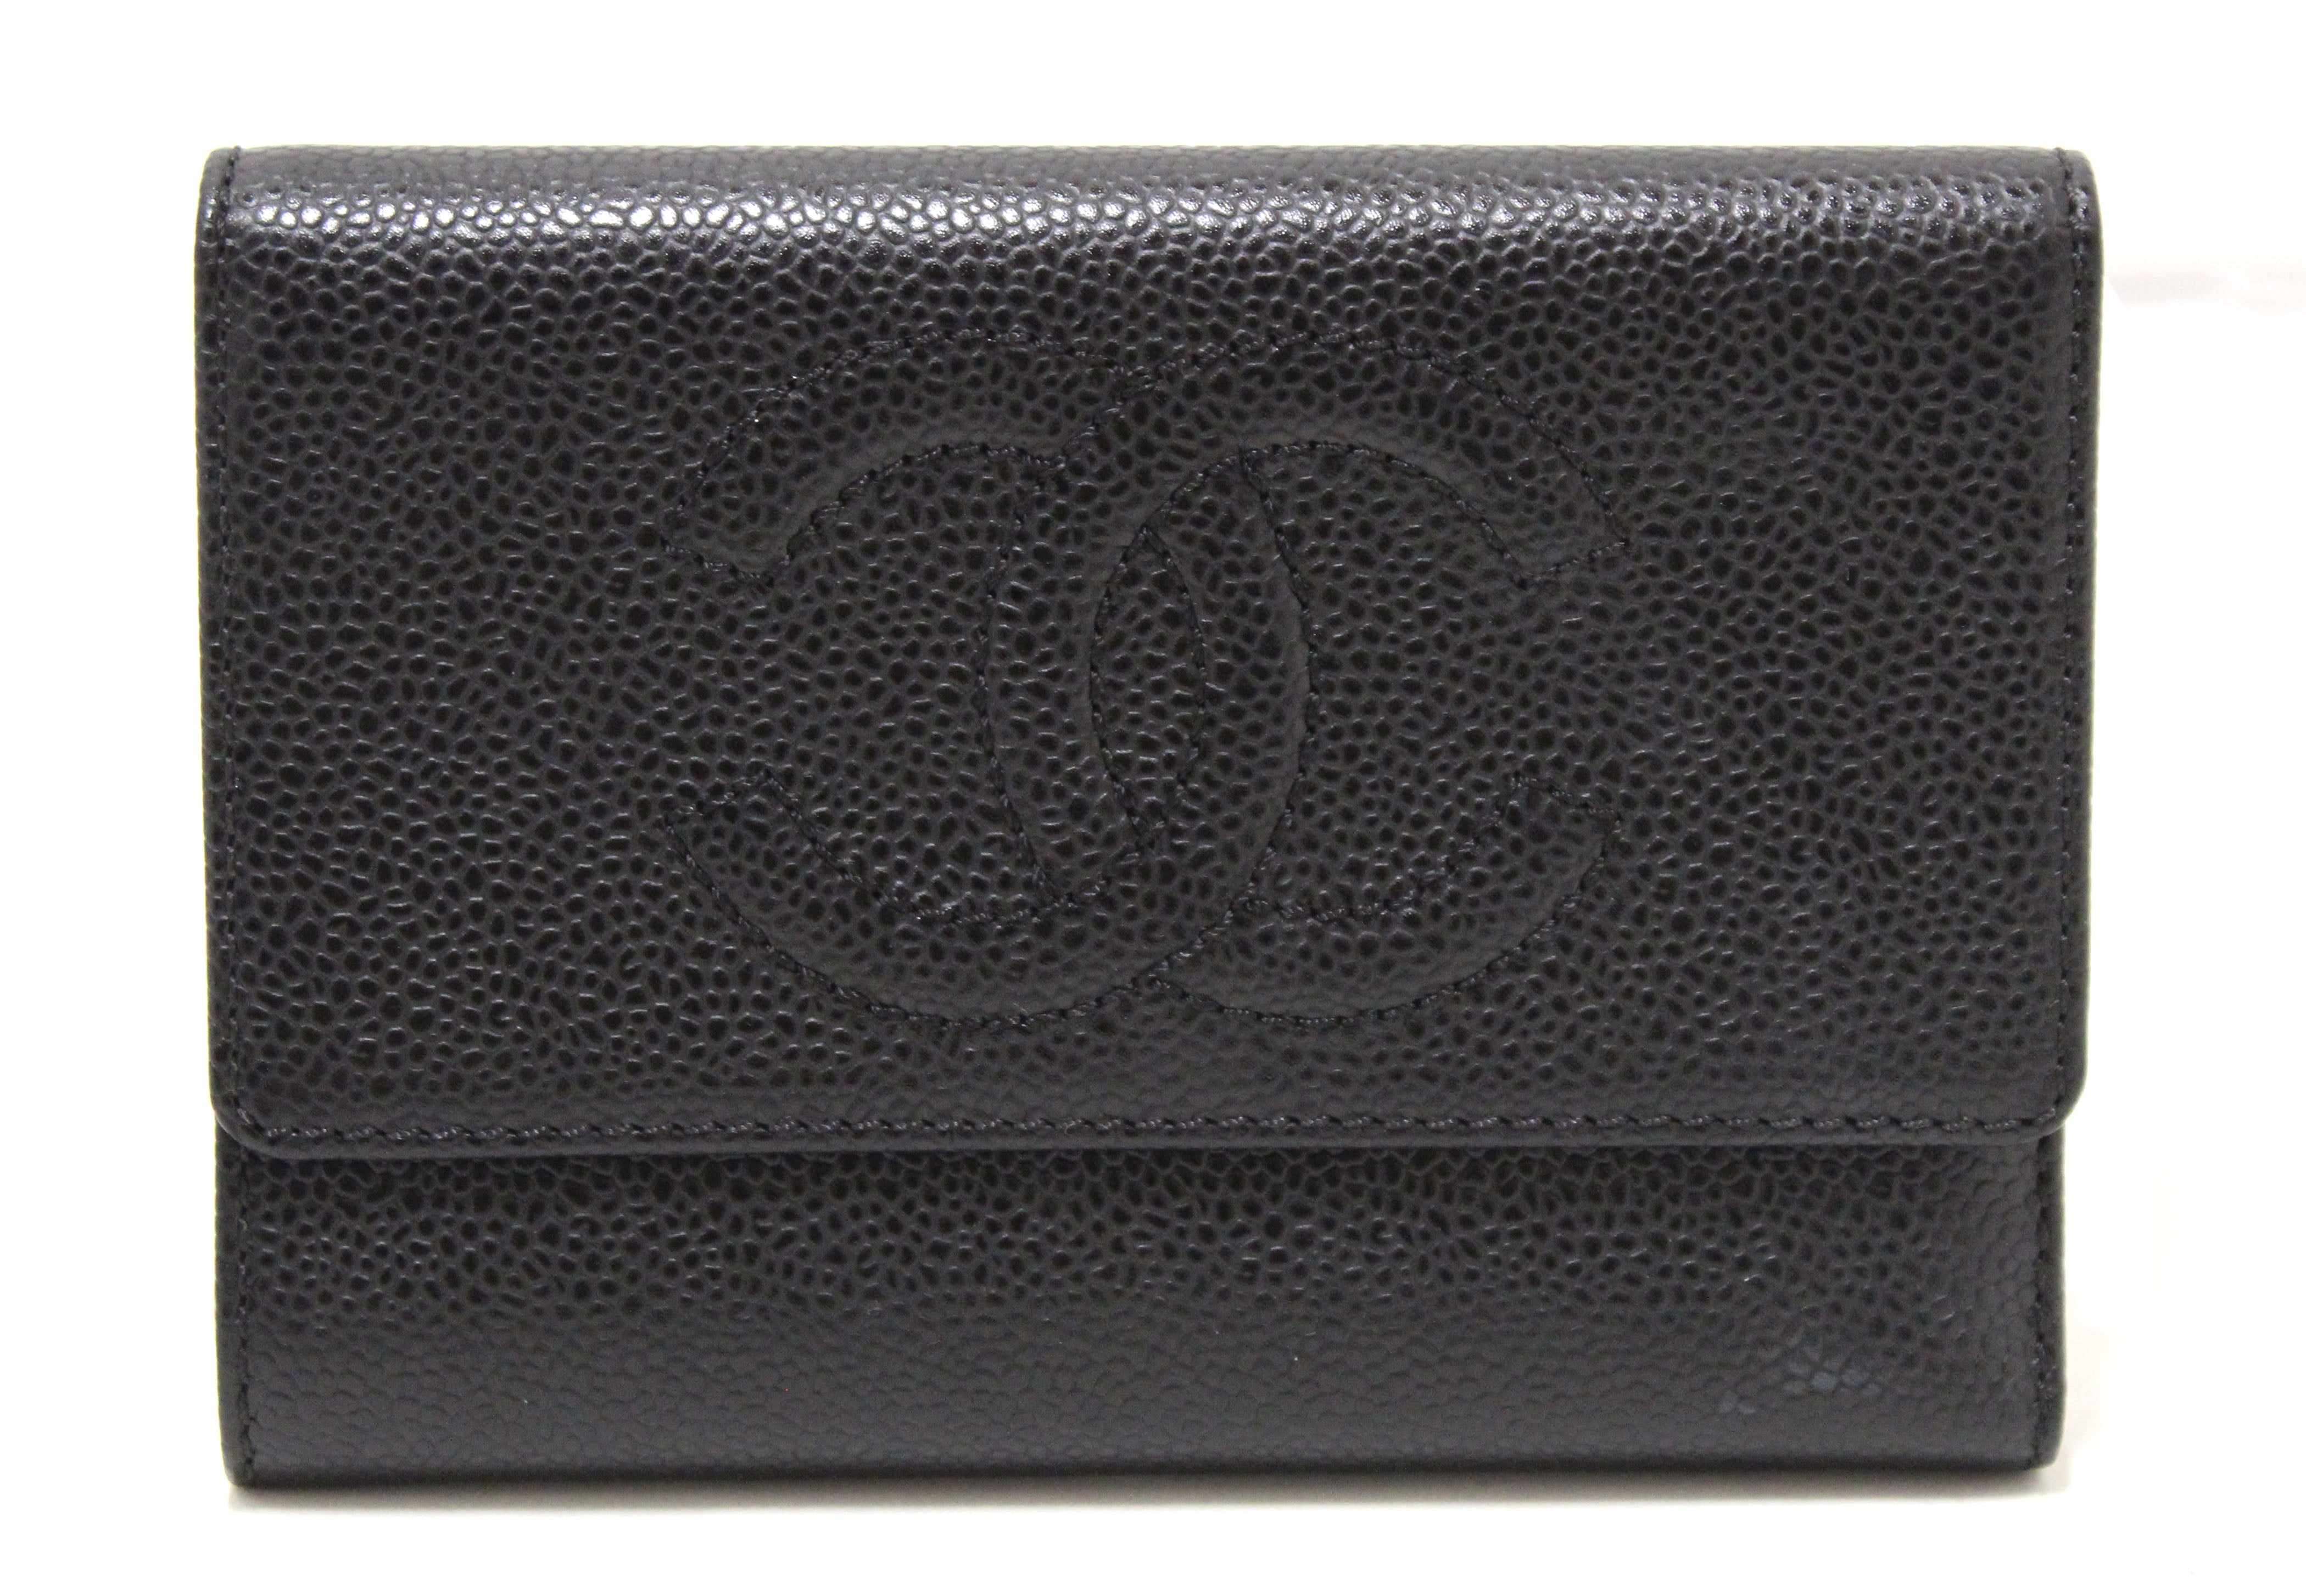 Chanel - Authenticated Timeless/Classique Wallet - Leather Black Plain for Women, Never Worn, with Tag